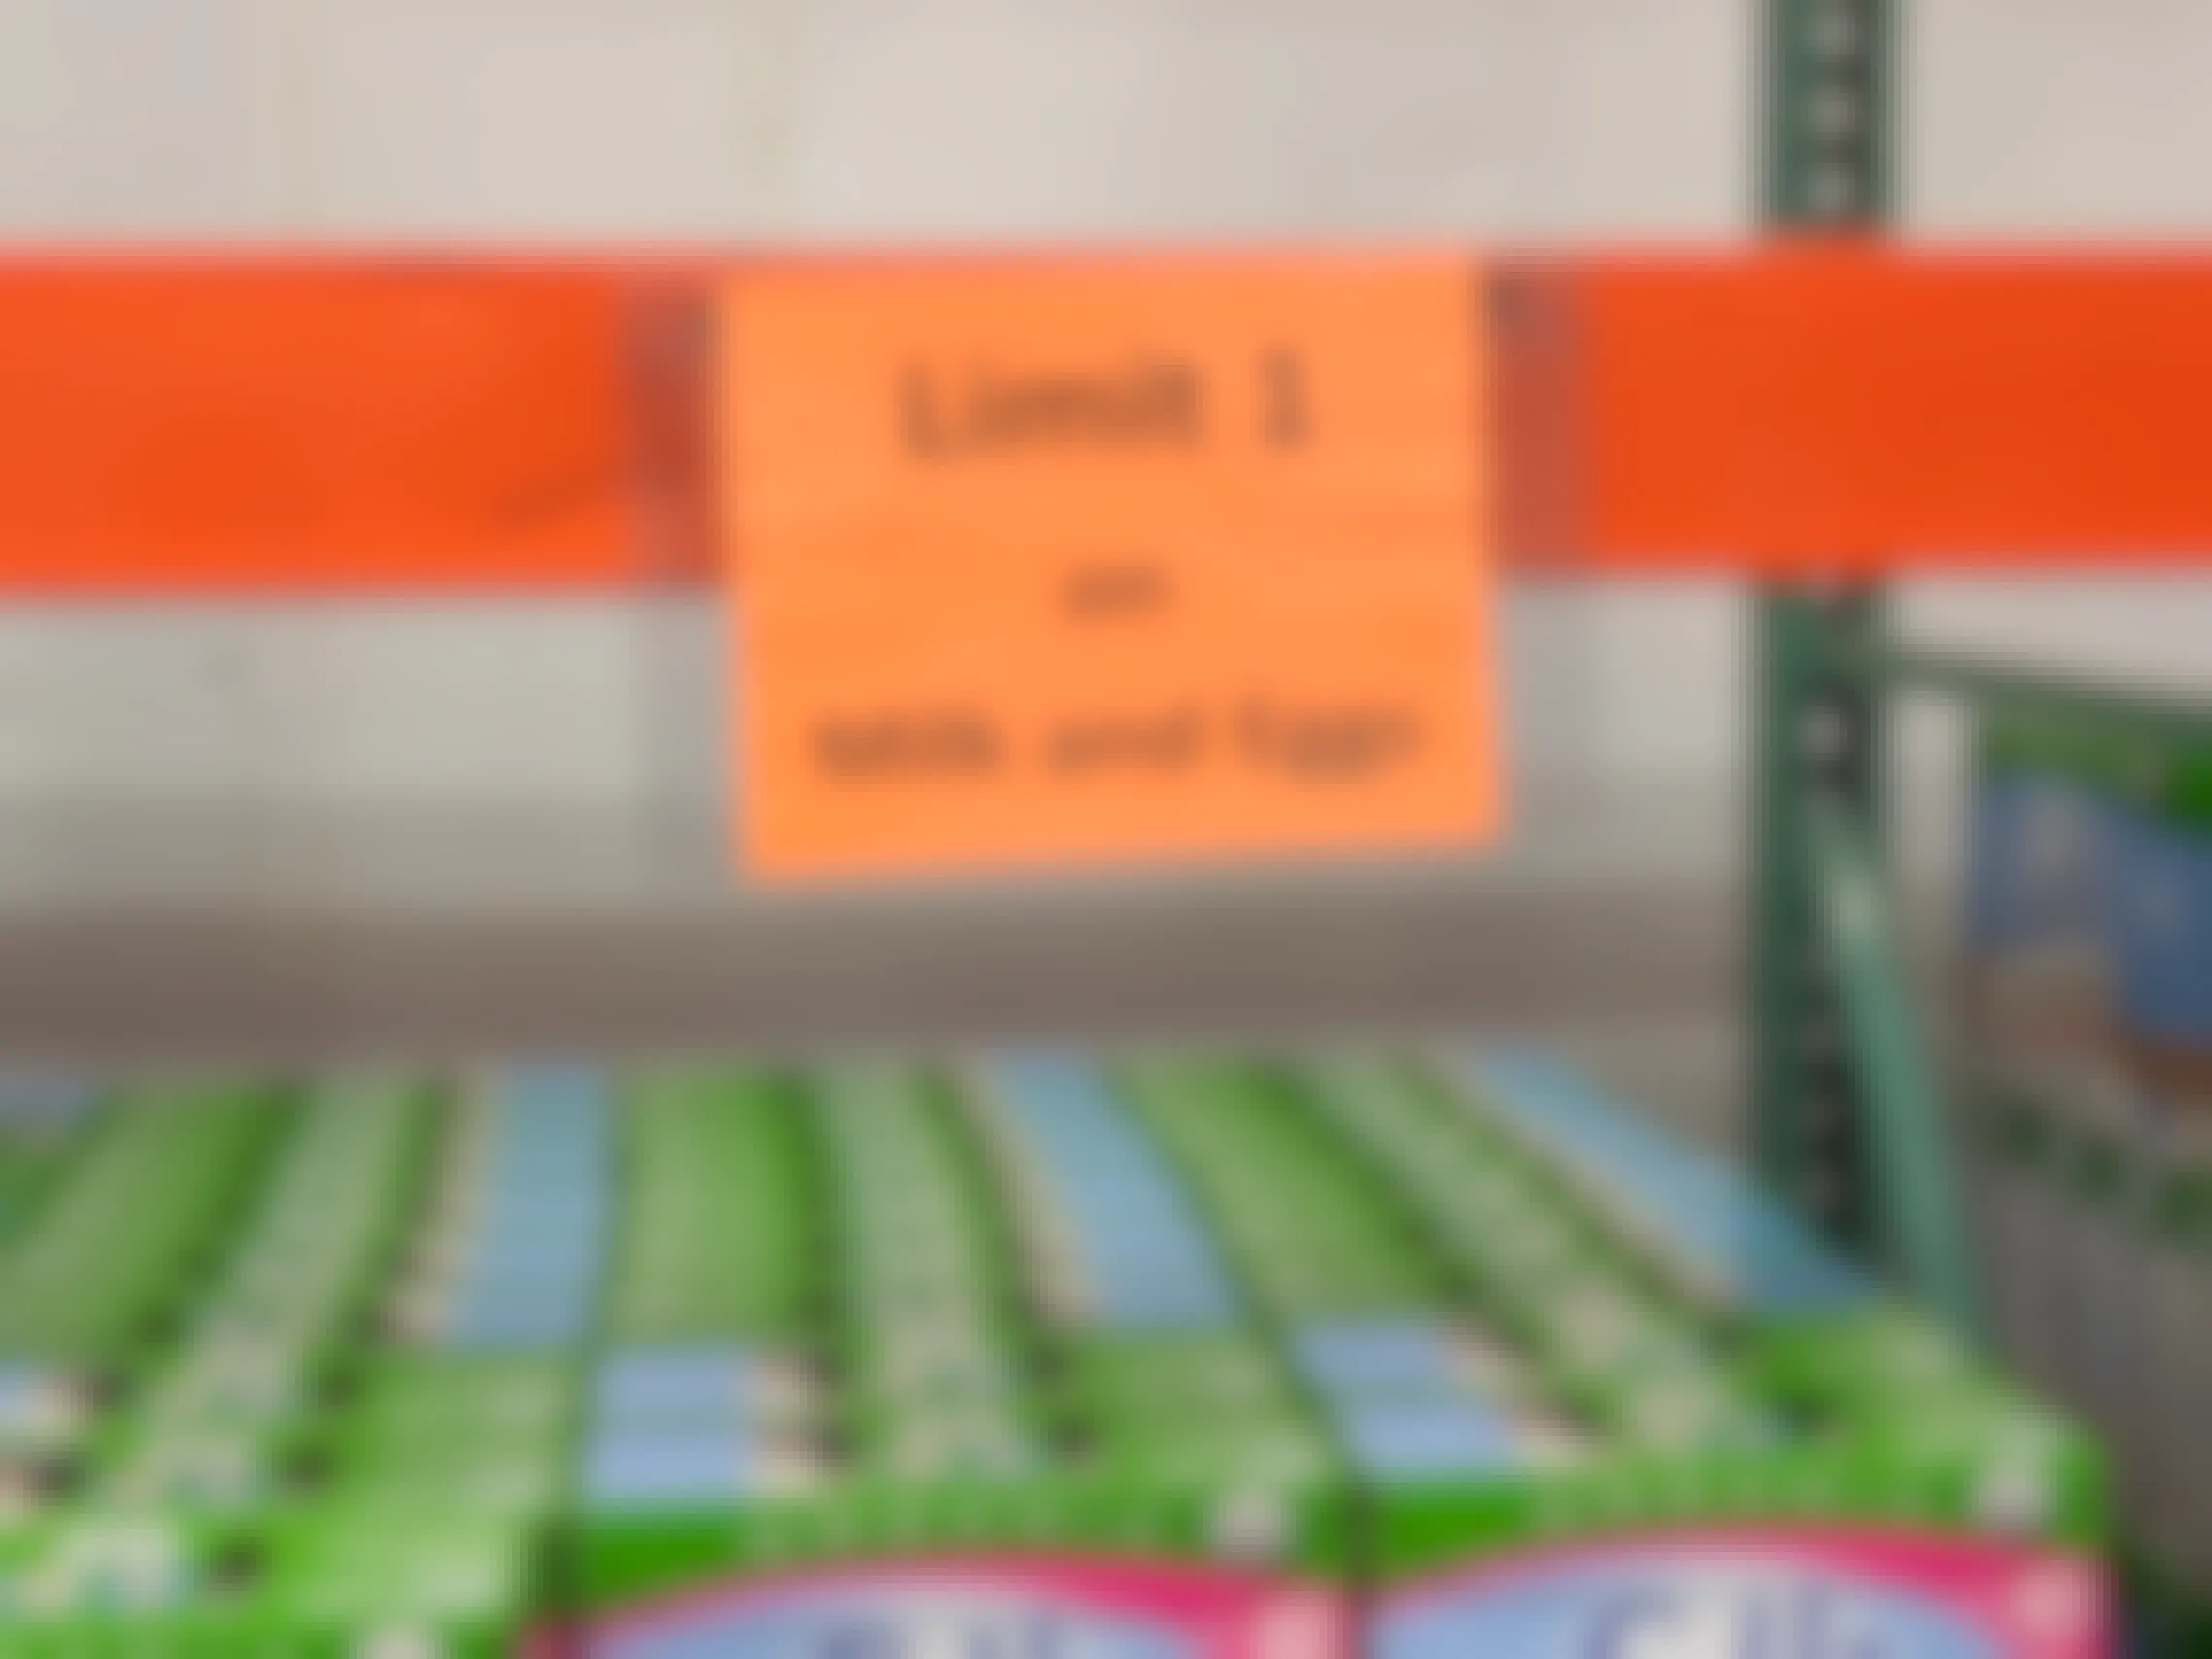 A sign for eggs and milk that reads "limit 1